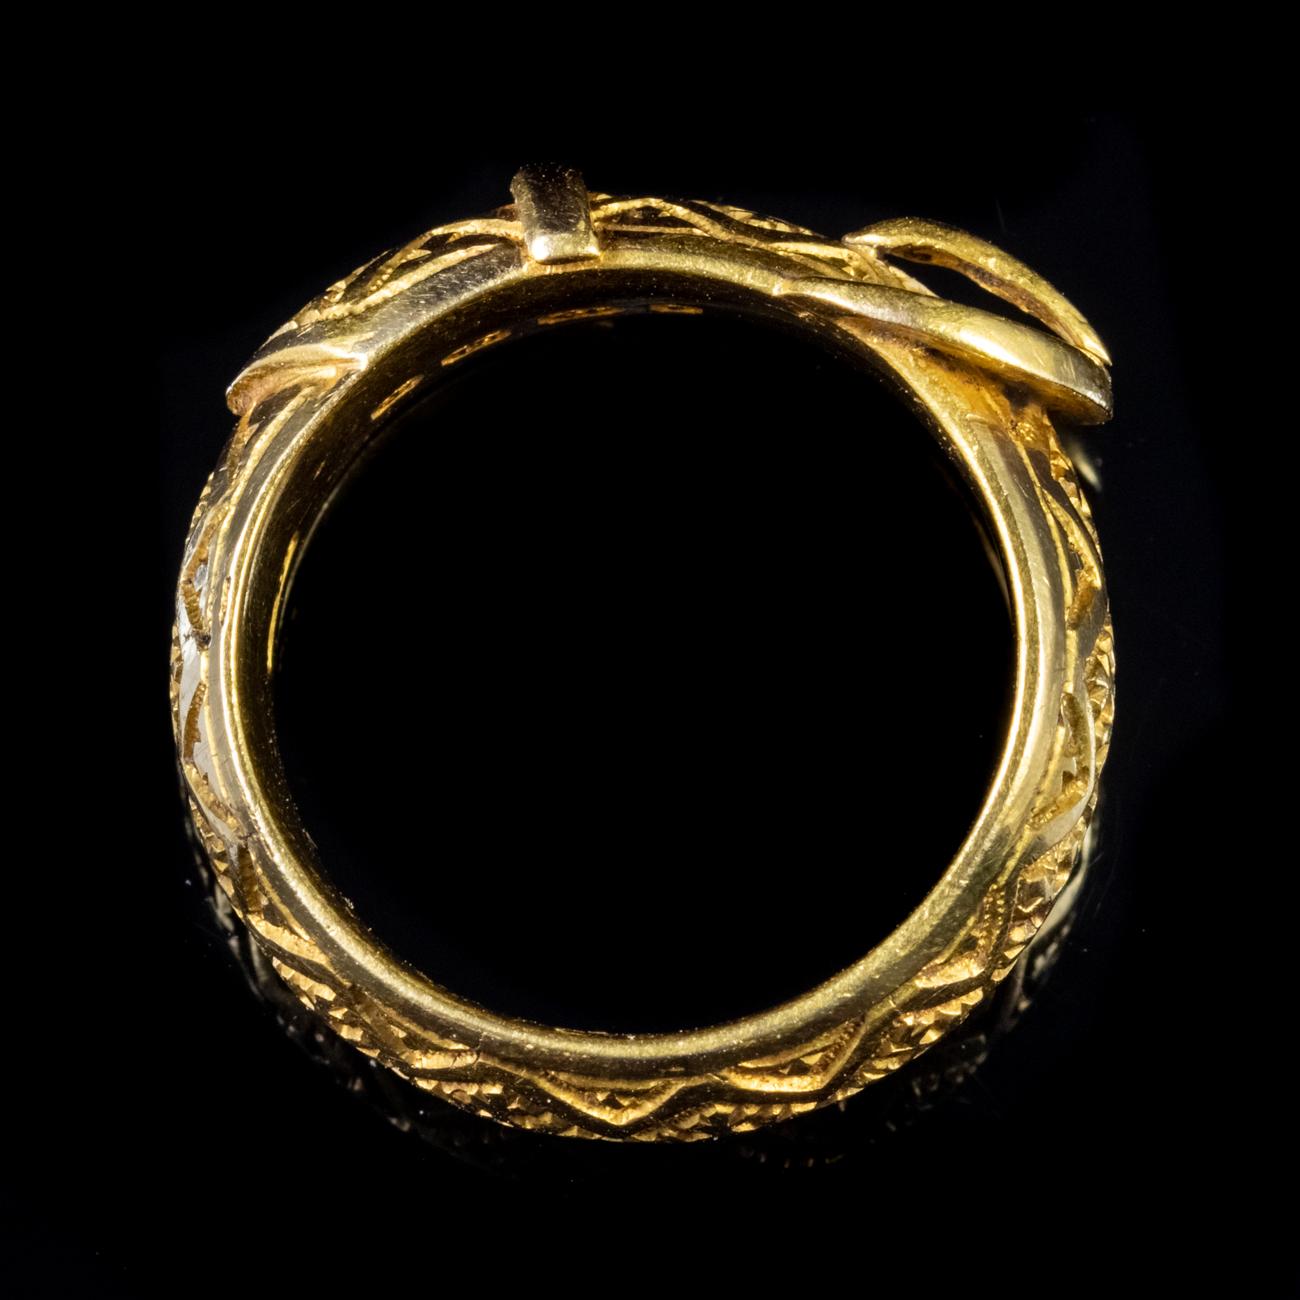 Antique Victorian Belt and Buckle Ring 18 Carat Gold, Dated 1877 For Sale 1